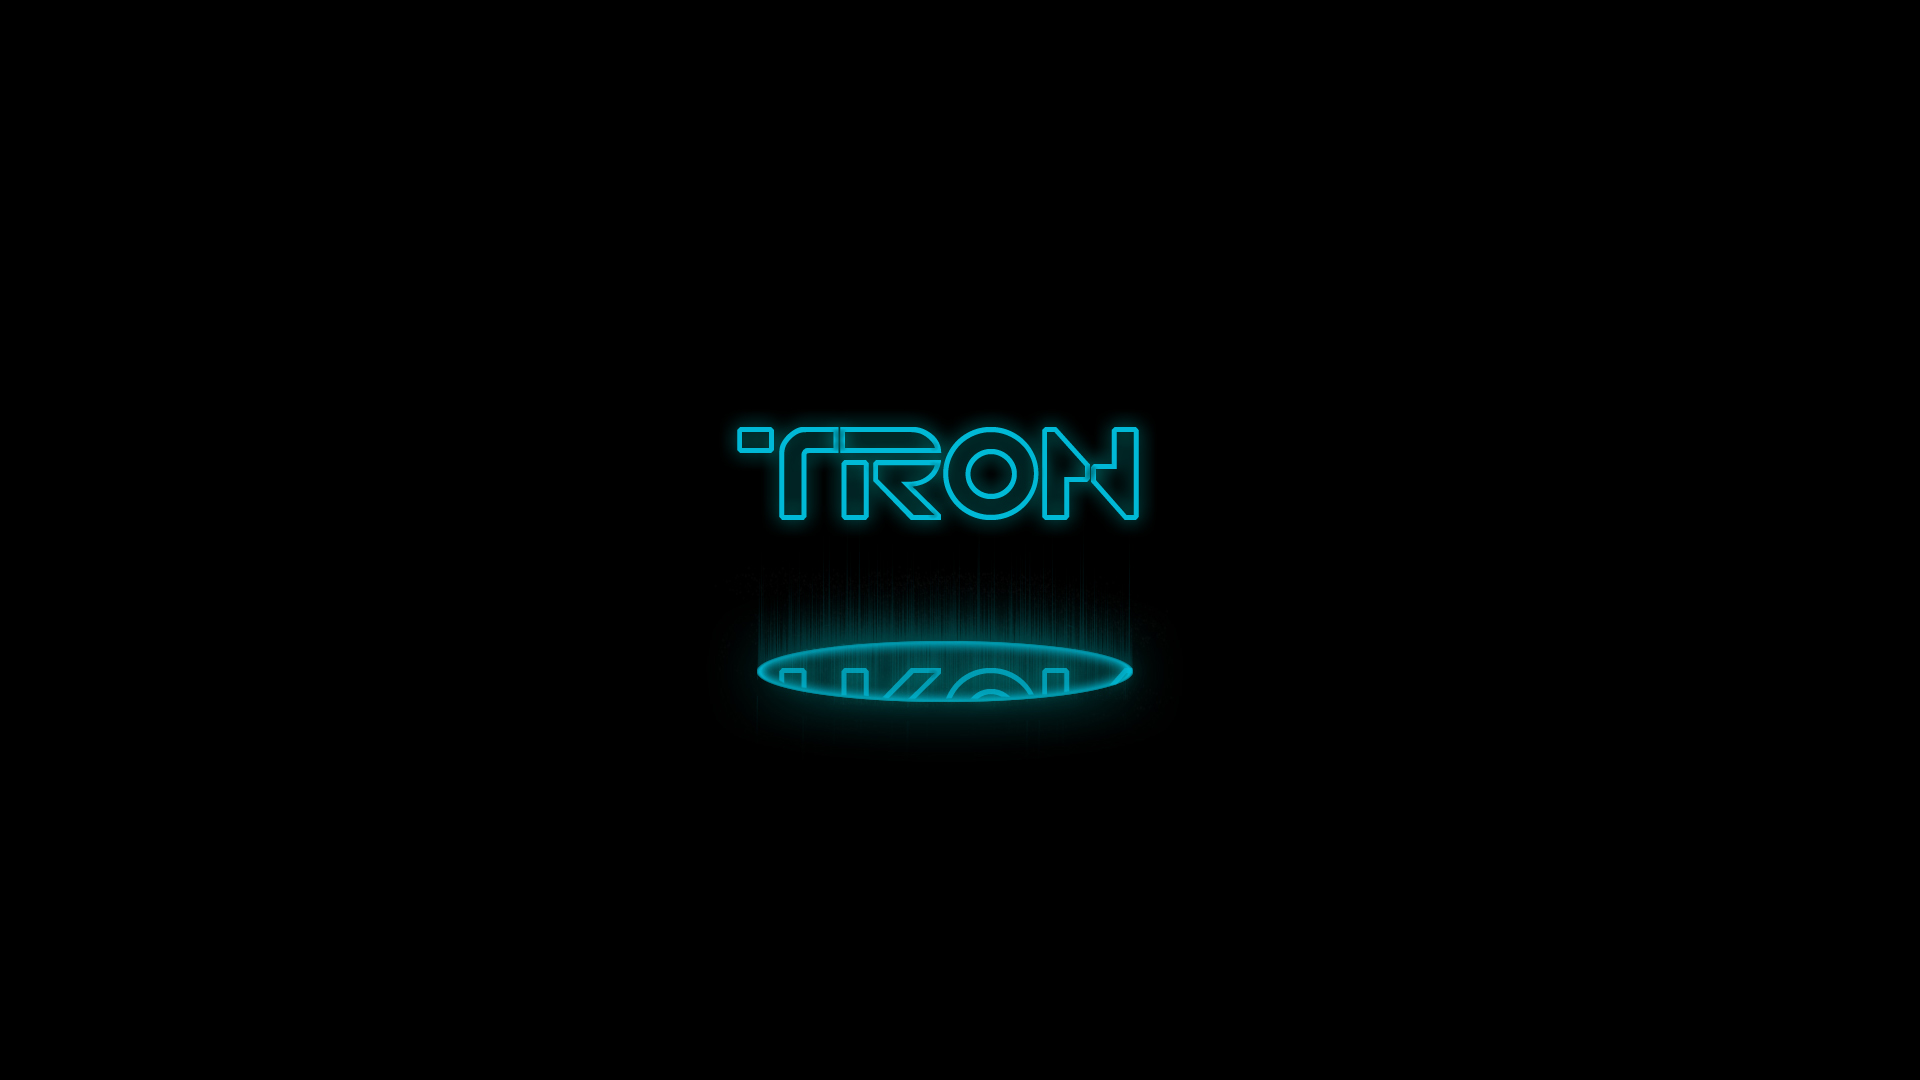 TRON: Legacy-inspired artwork featuring a futuristic, glowing design with a hint of Disney magic